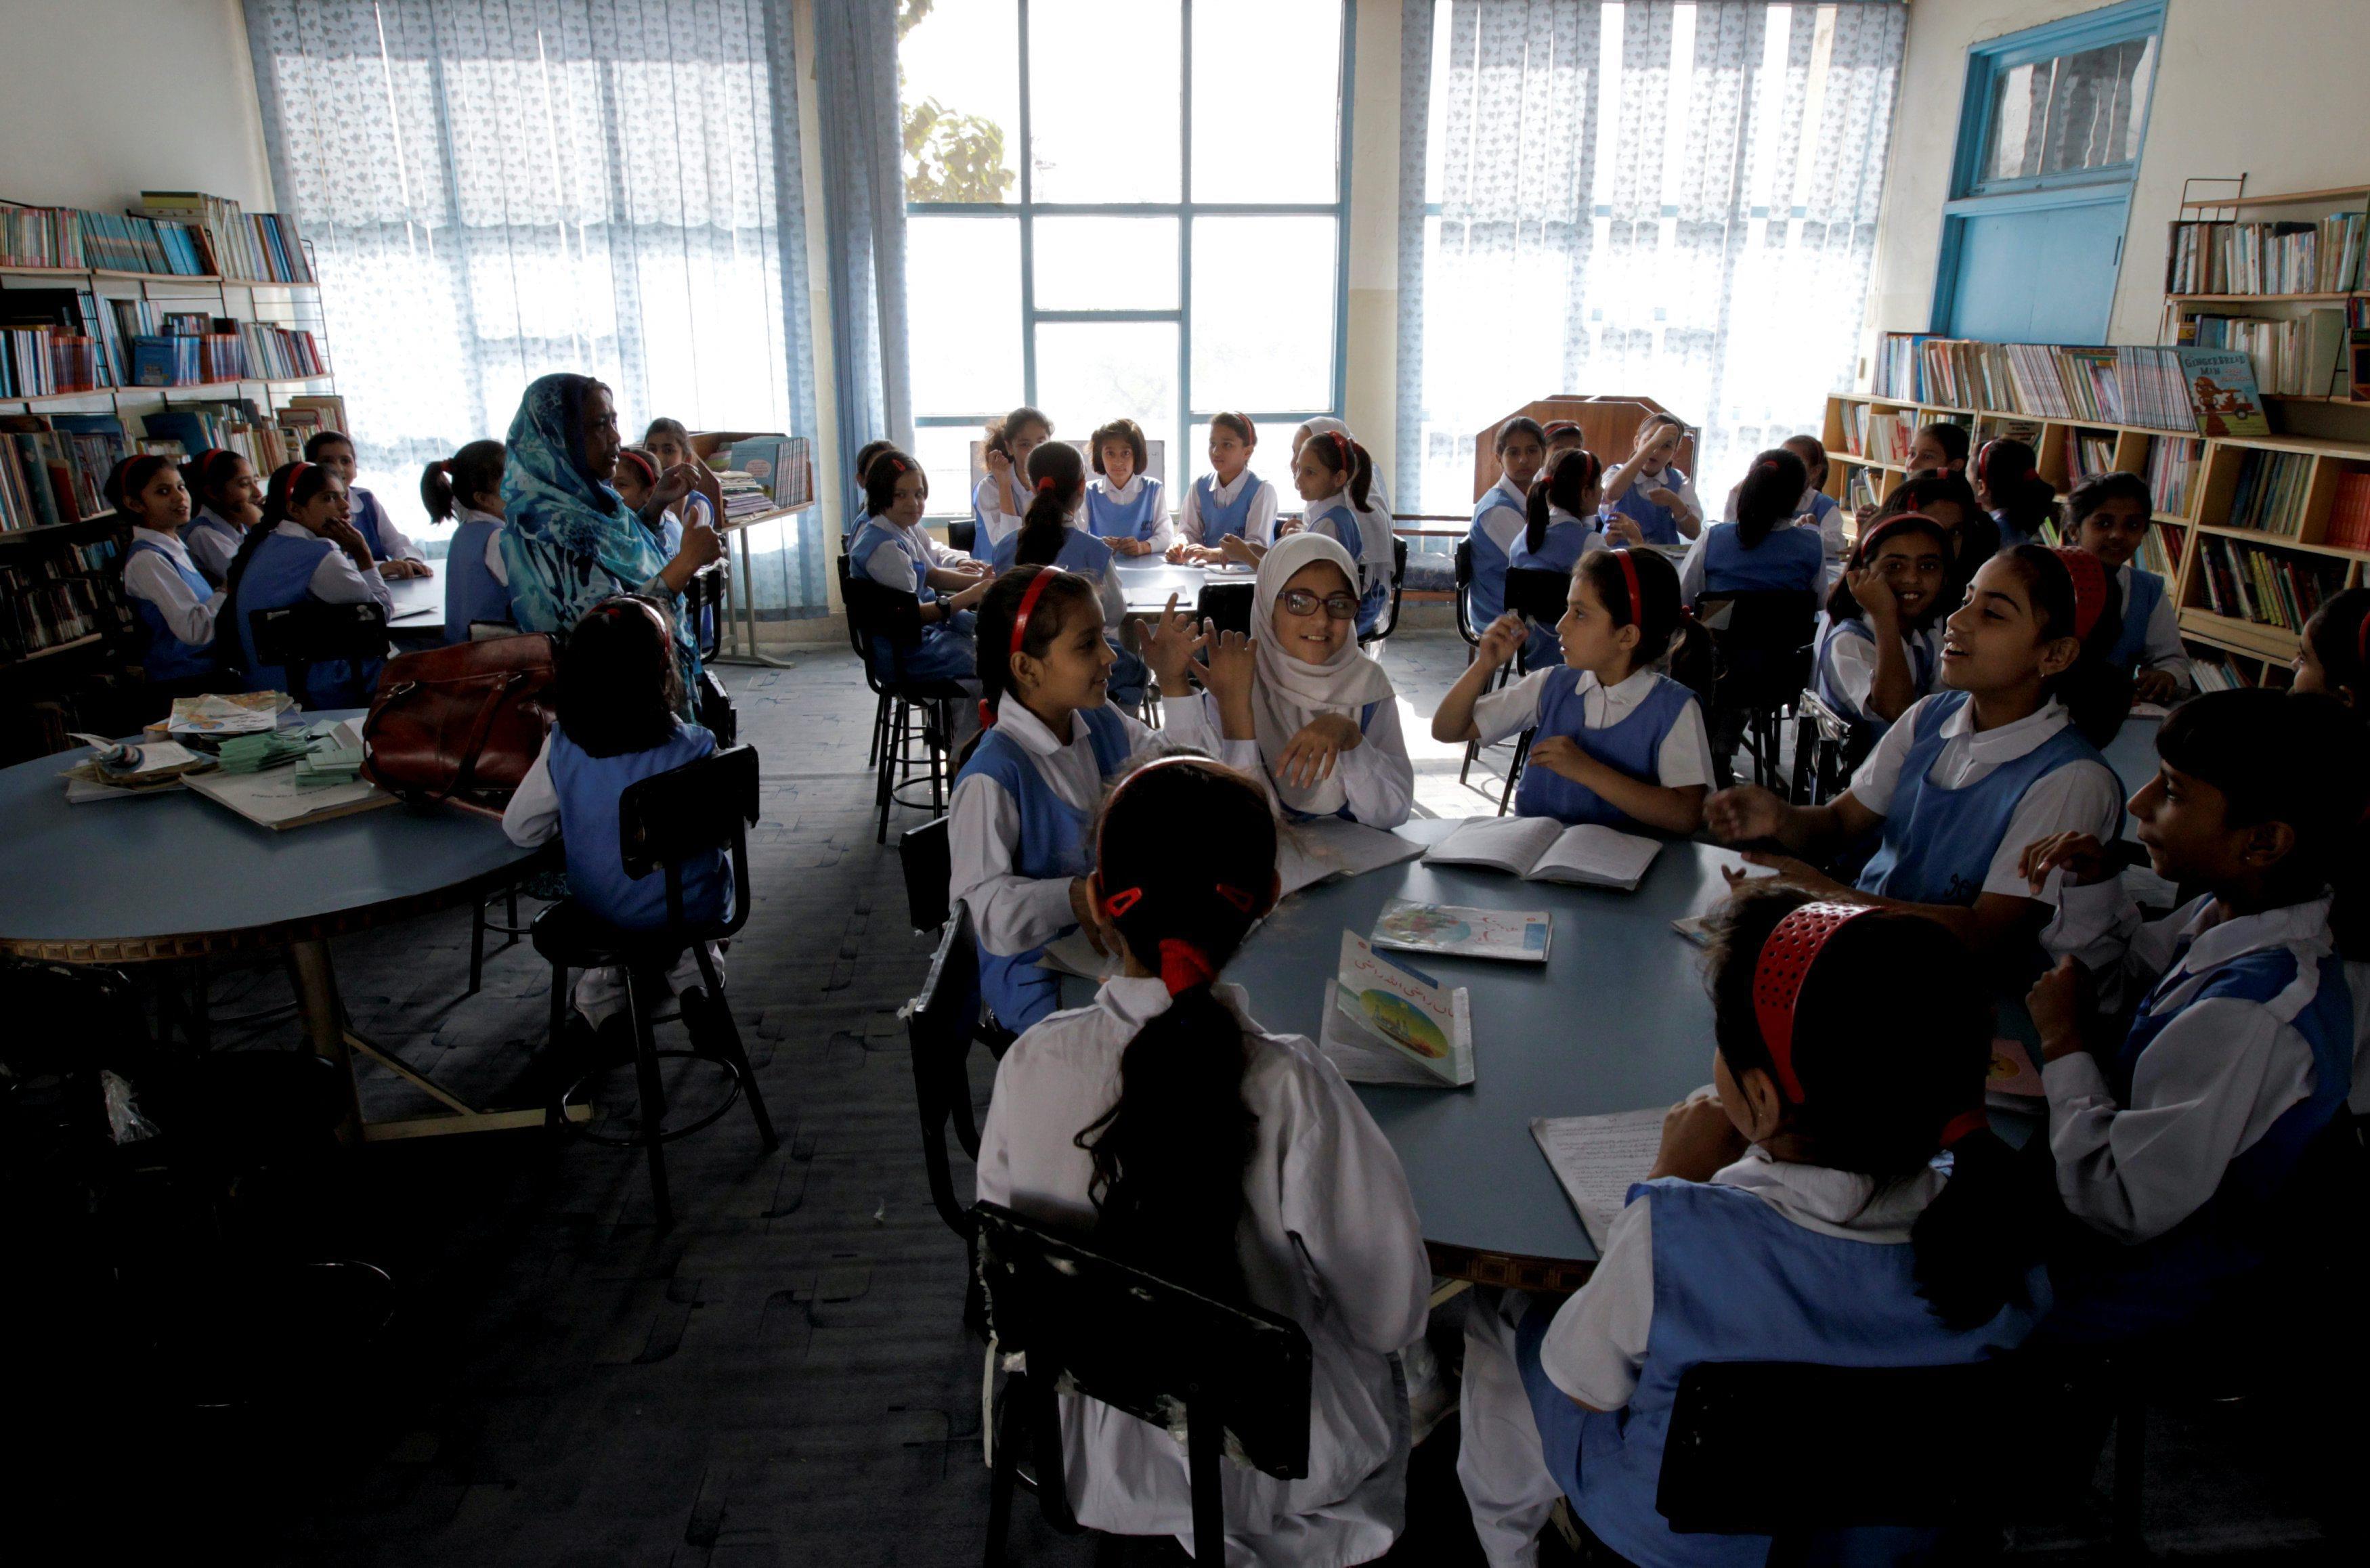 The Wider Image: Pakistan debates how to fill education gaps